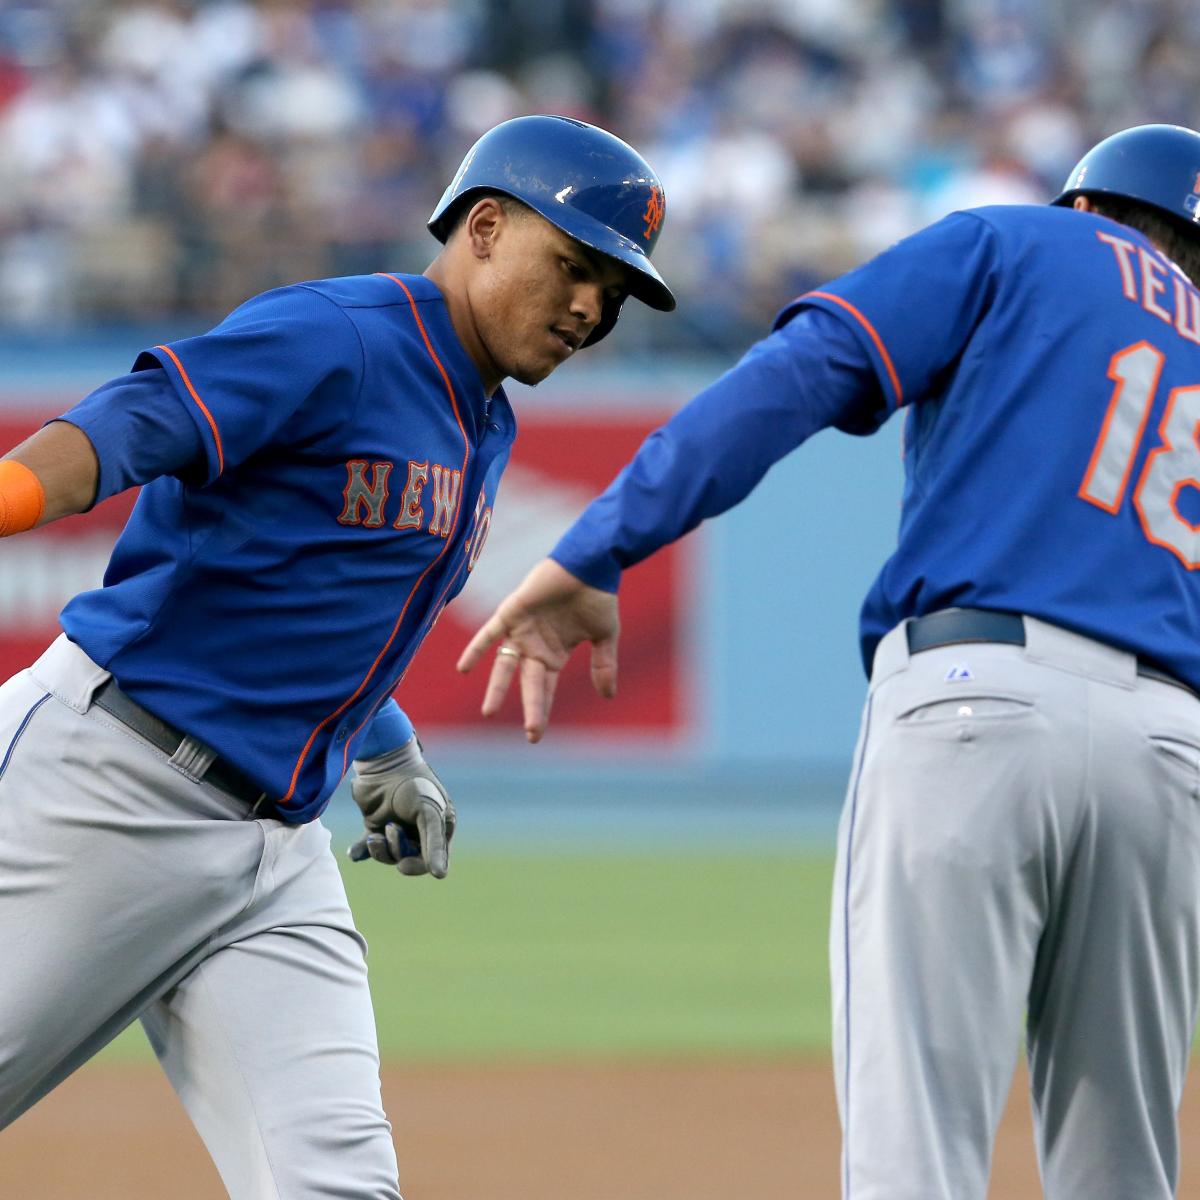 Mets The Batting Order the New York Mets Must Begin Using More of